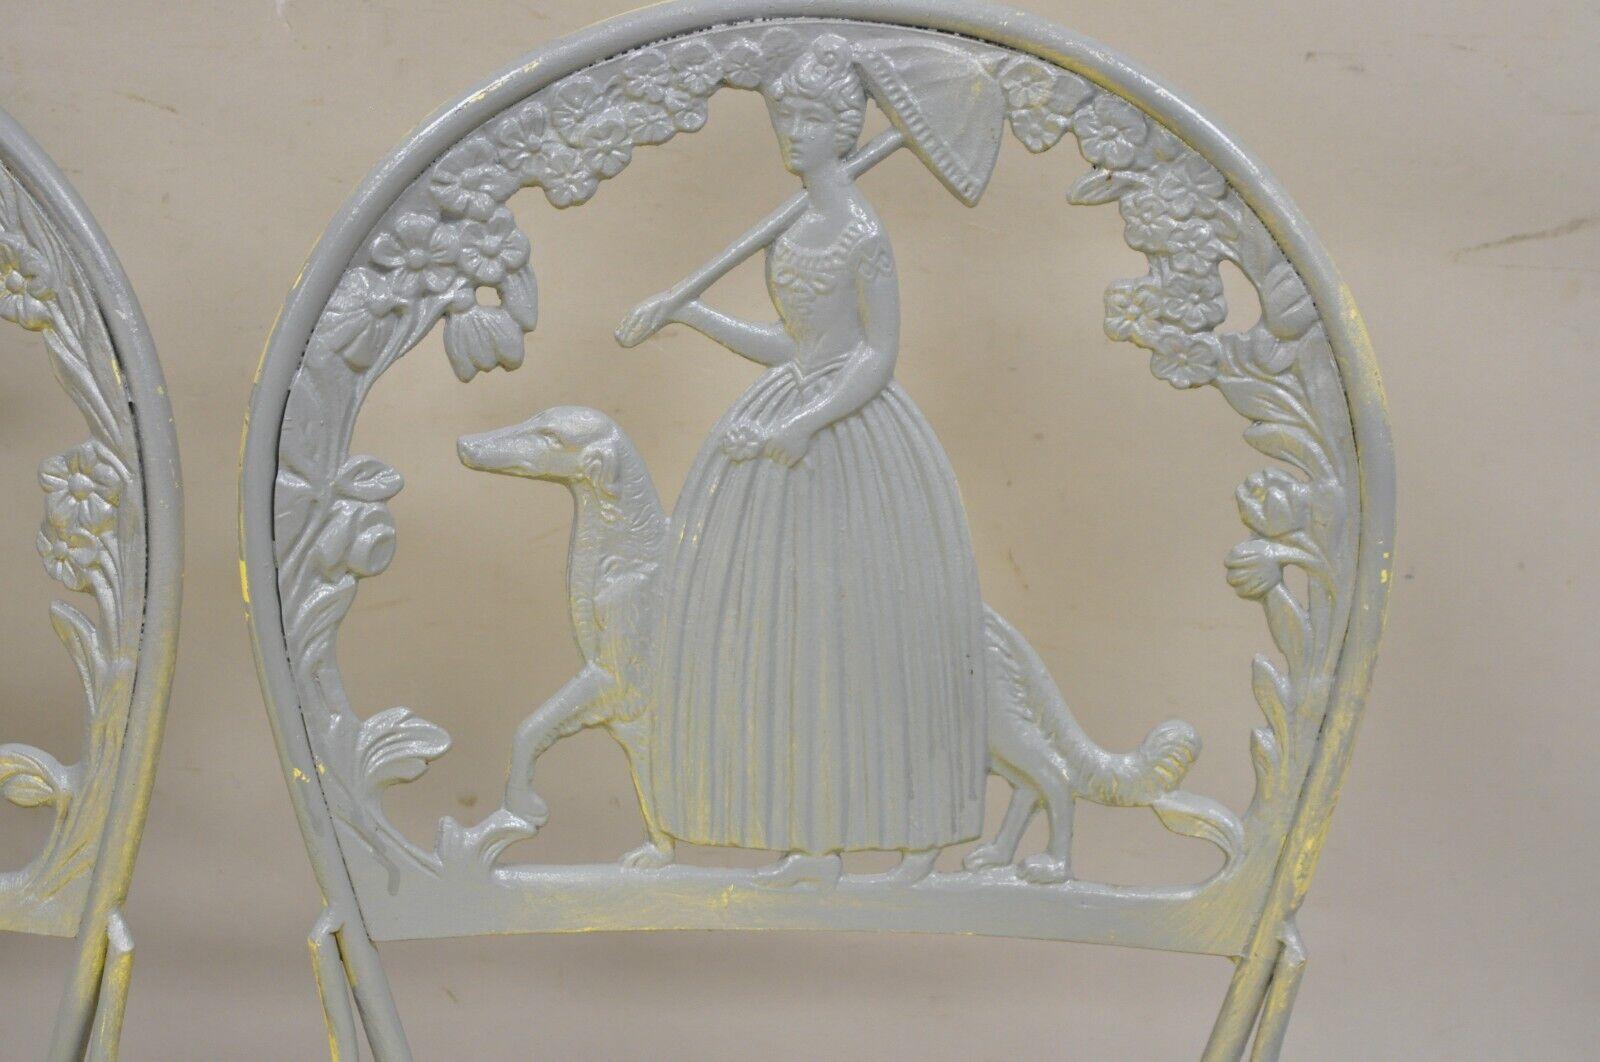 20th Century Victorian Style Cast Aluminum Courting Scene Garden Patio Bistro Chairs - a Pair